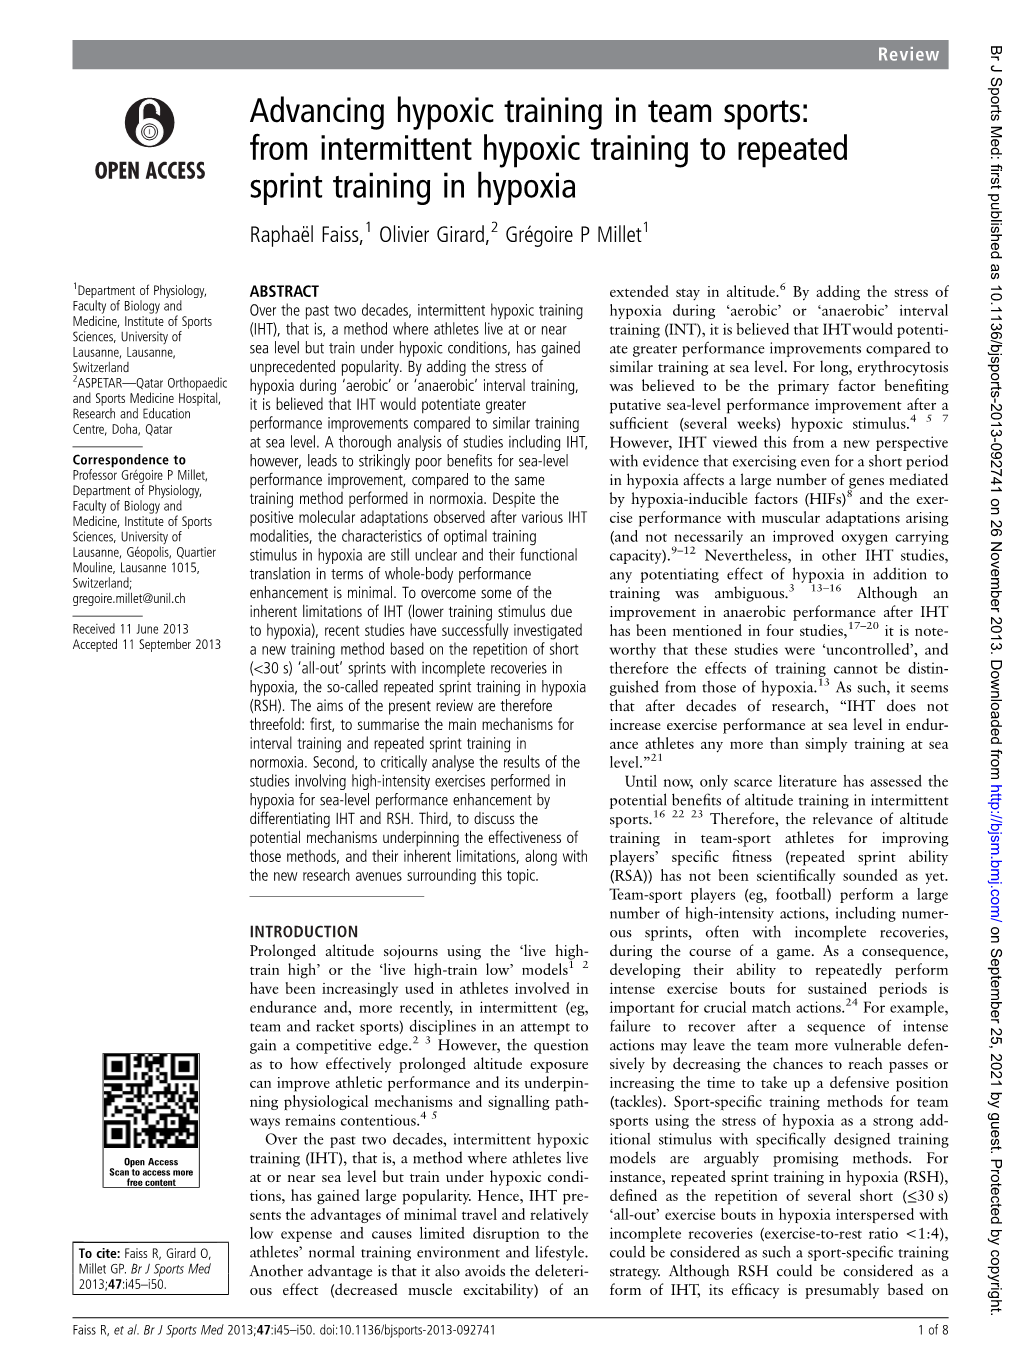 Advancing Hypoxic Training in Team Sports: from Intermittent Hypoxic Training to Repeated Sprint Training in Hypoxia